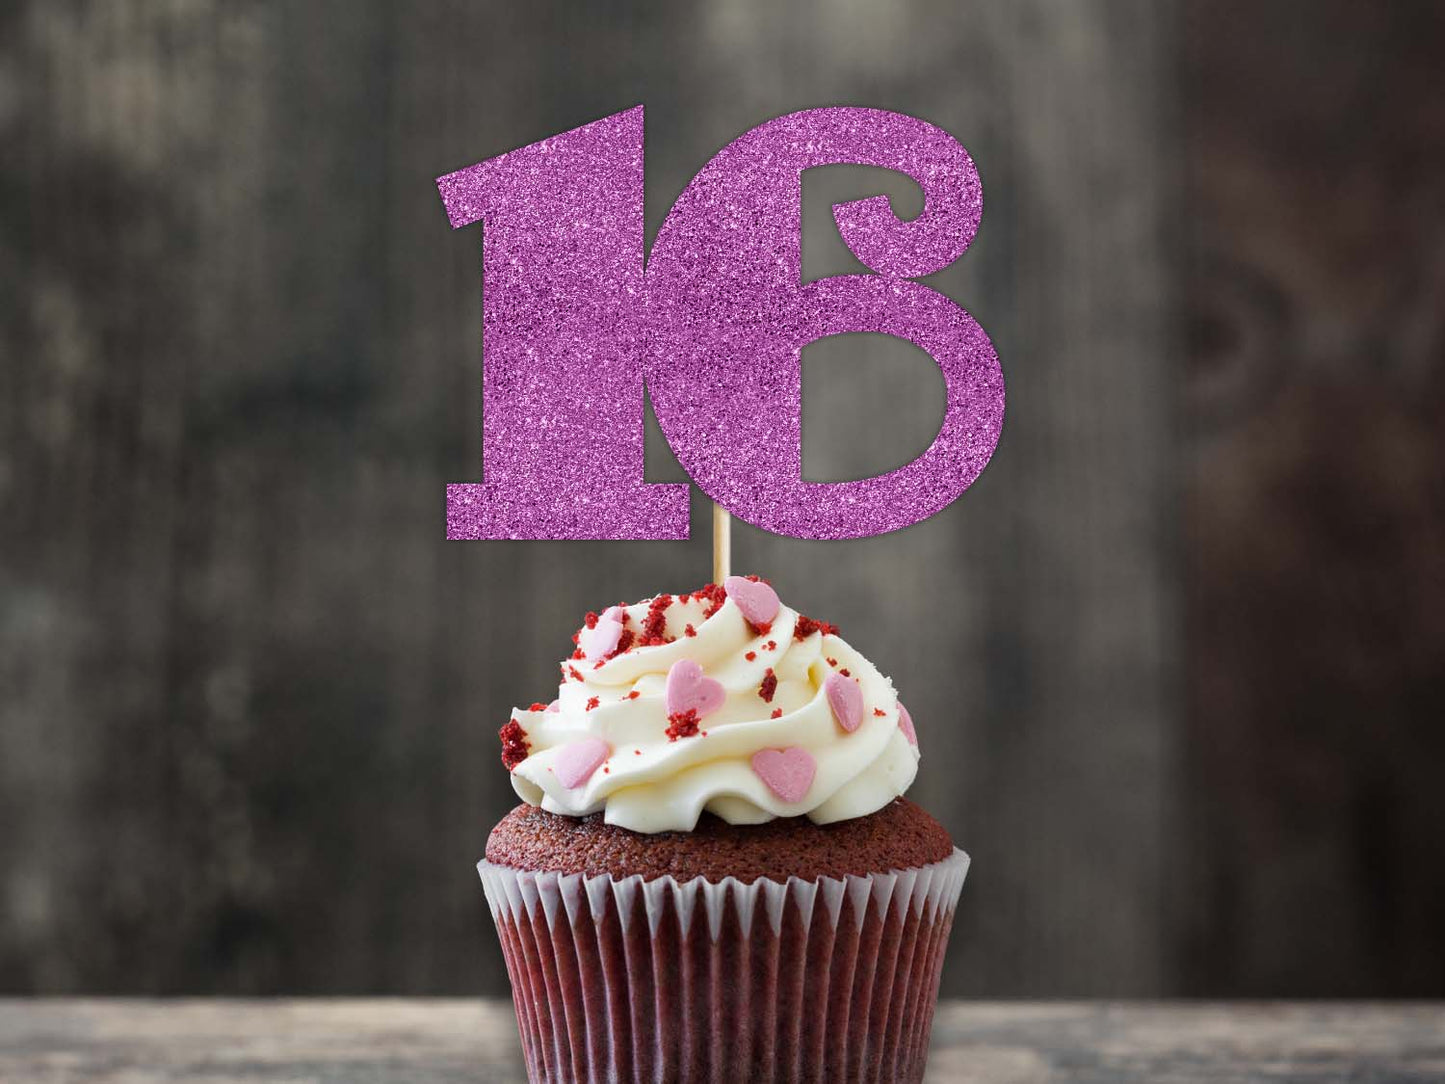 Age Number Cupcake Topper. Party Decorations Ireland Dublin